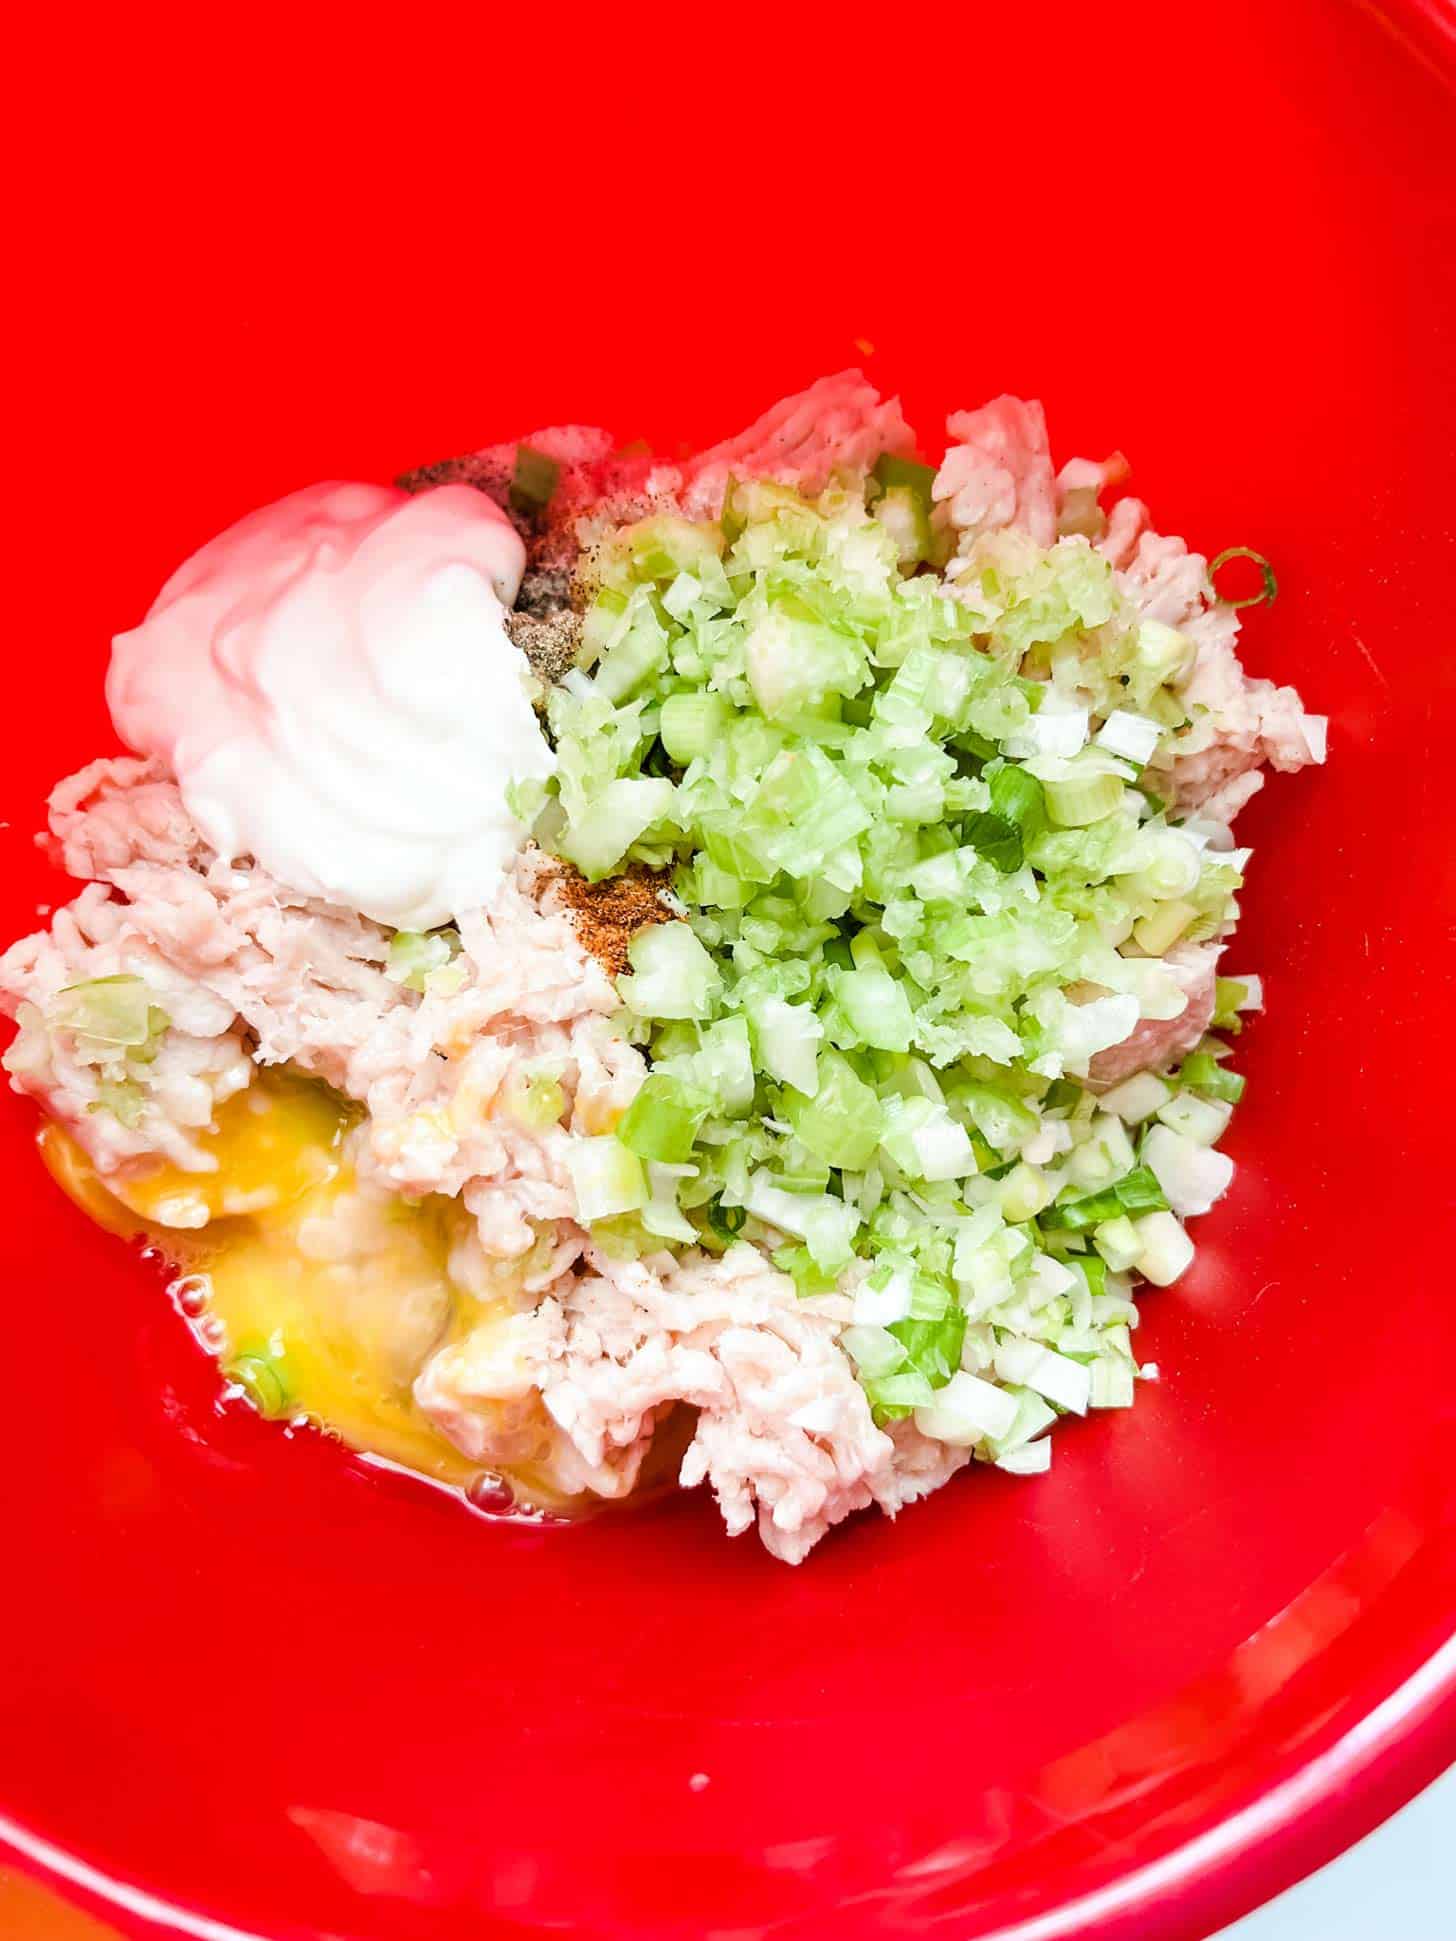 Ground chicken, sour cream, celery, egg, and seasonings in a red bow.